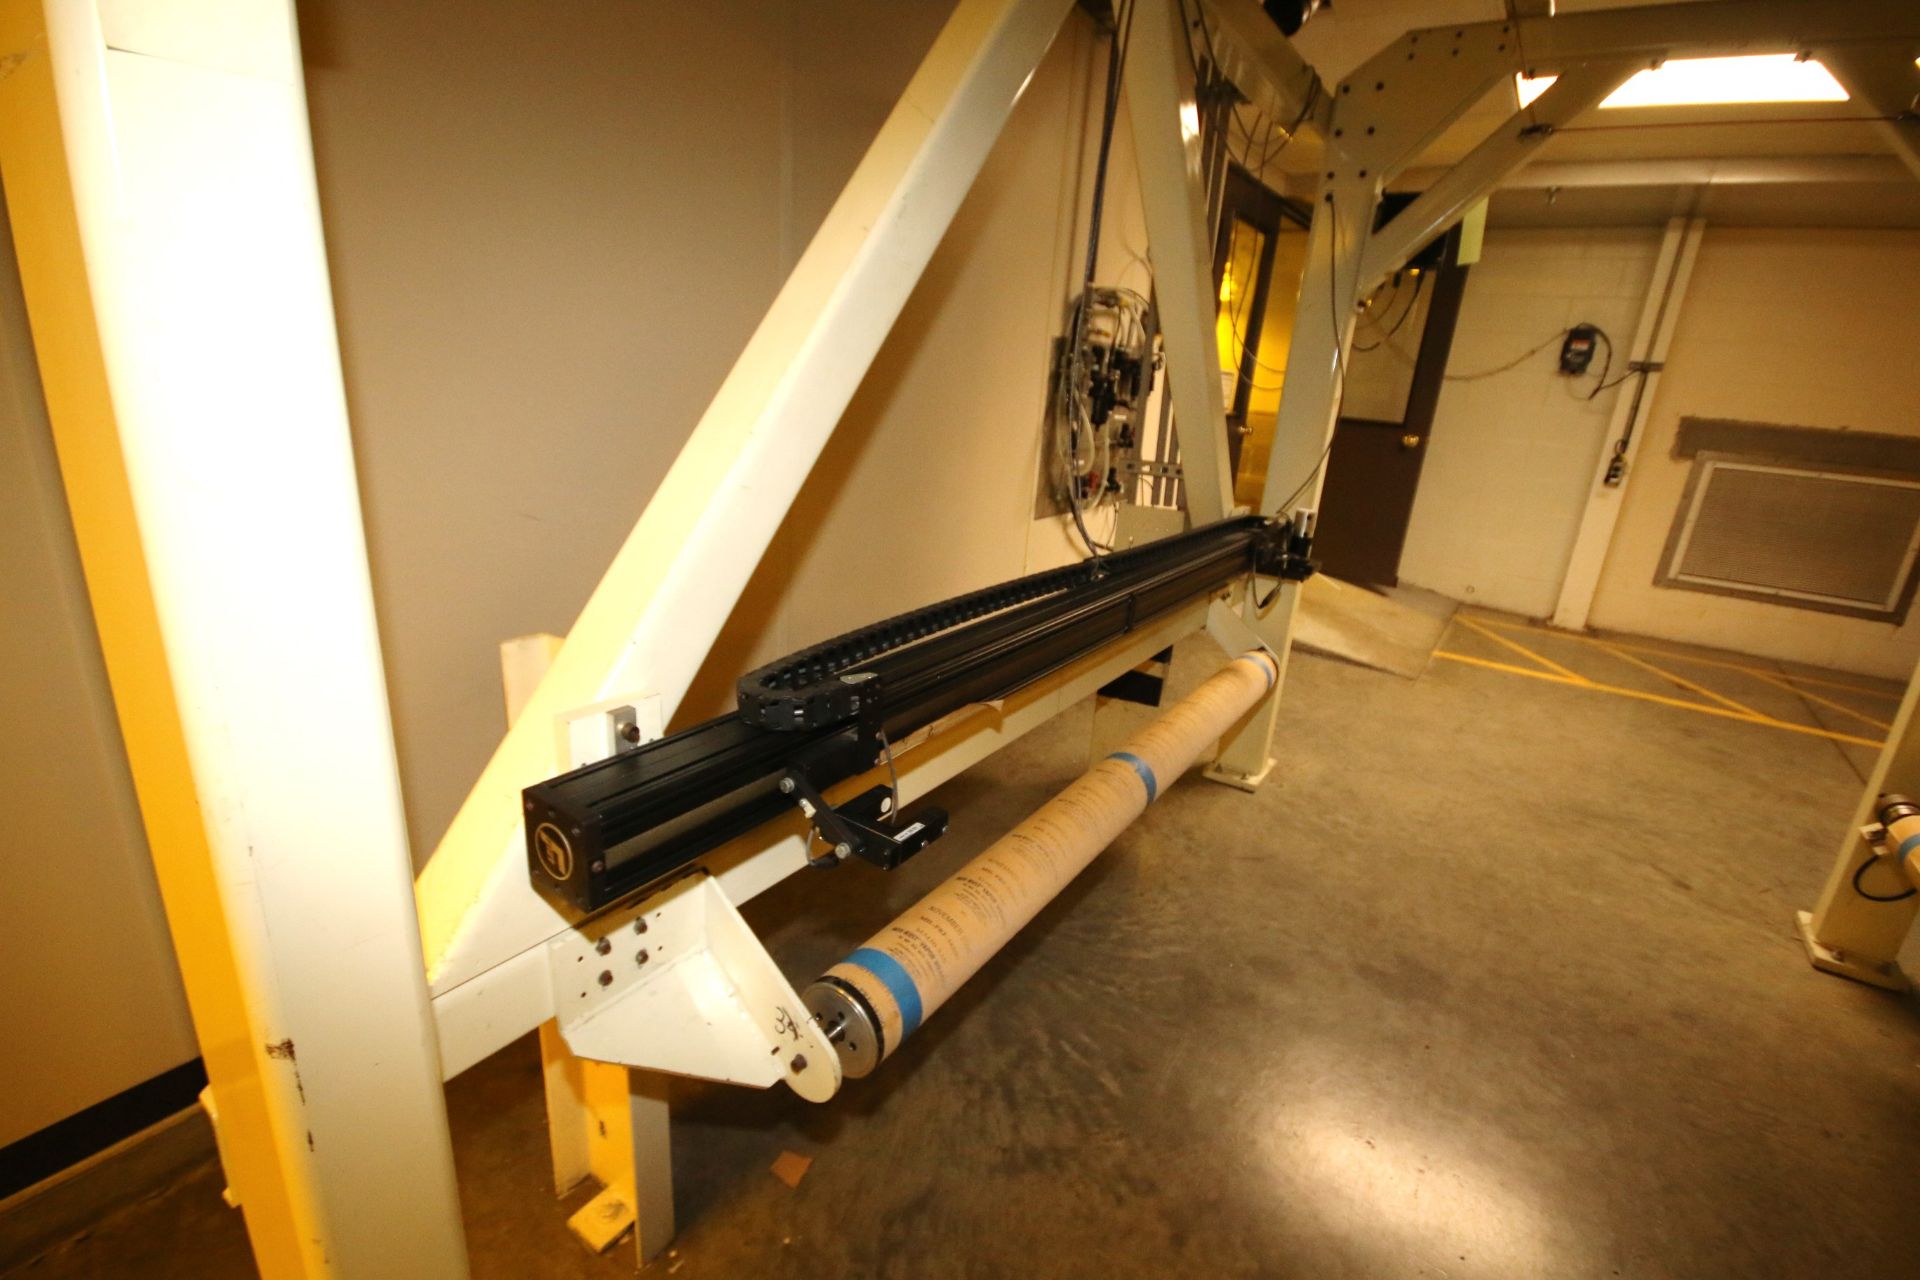 Fife Web Bridge/Edge Guide Base Roll #CDP-01 with 68” W Rolls and Fife Controls, Overall - Image 3 of 7